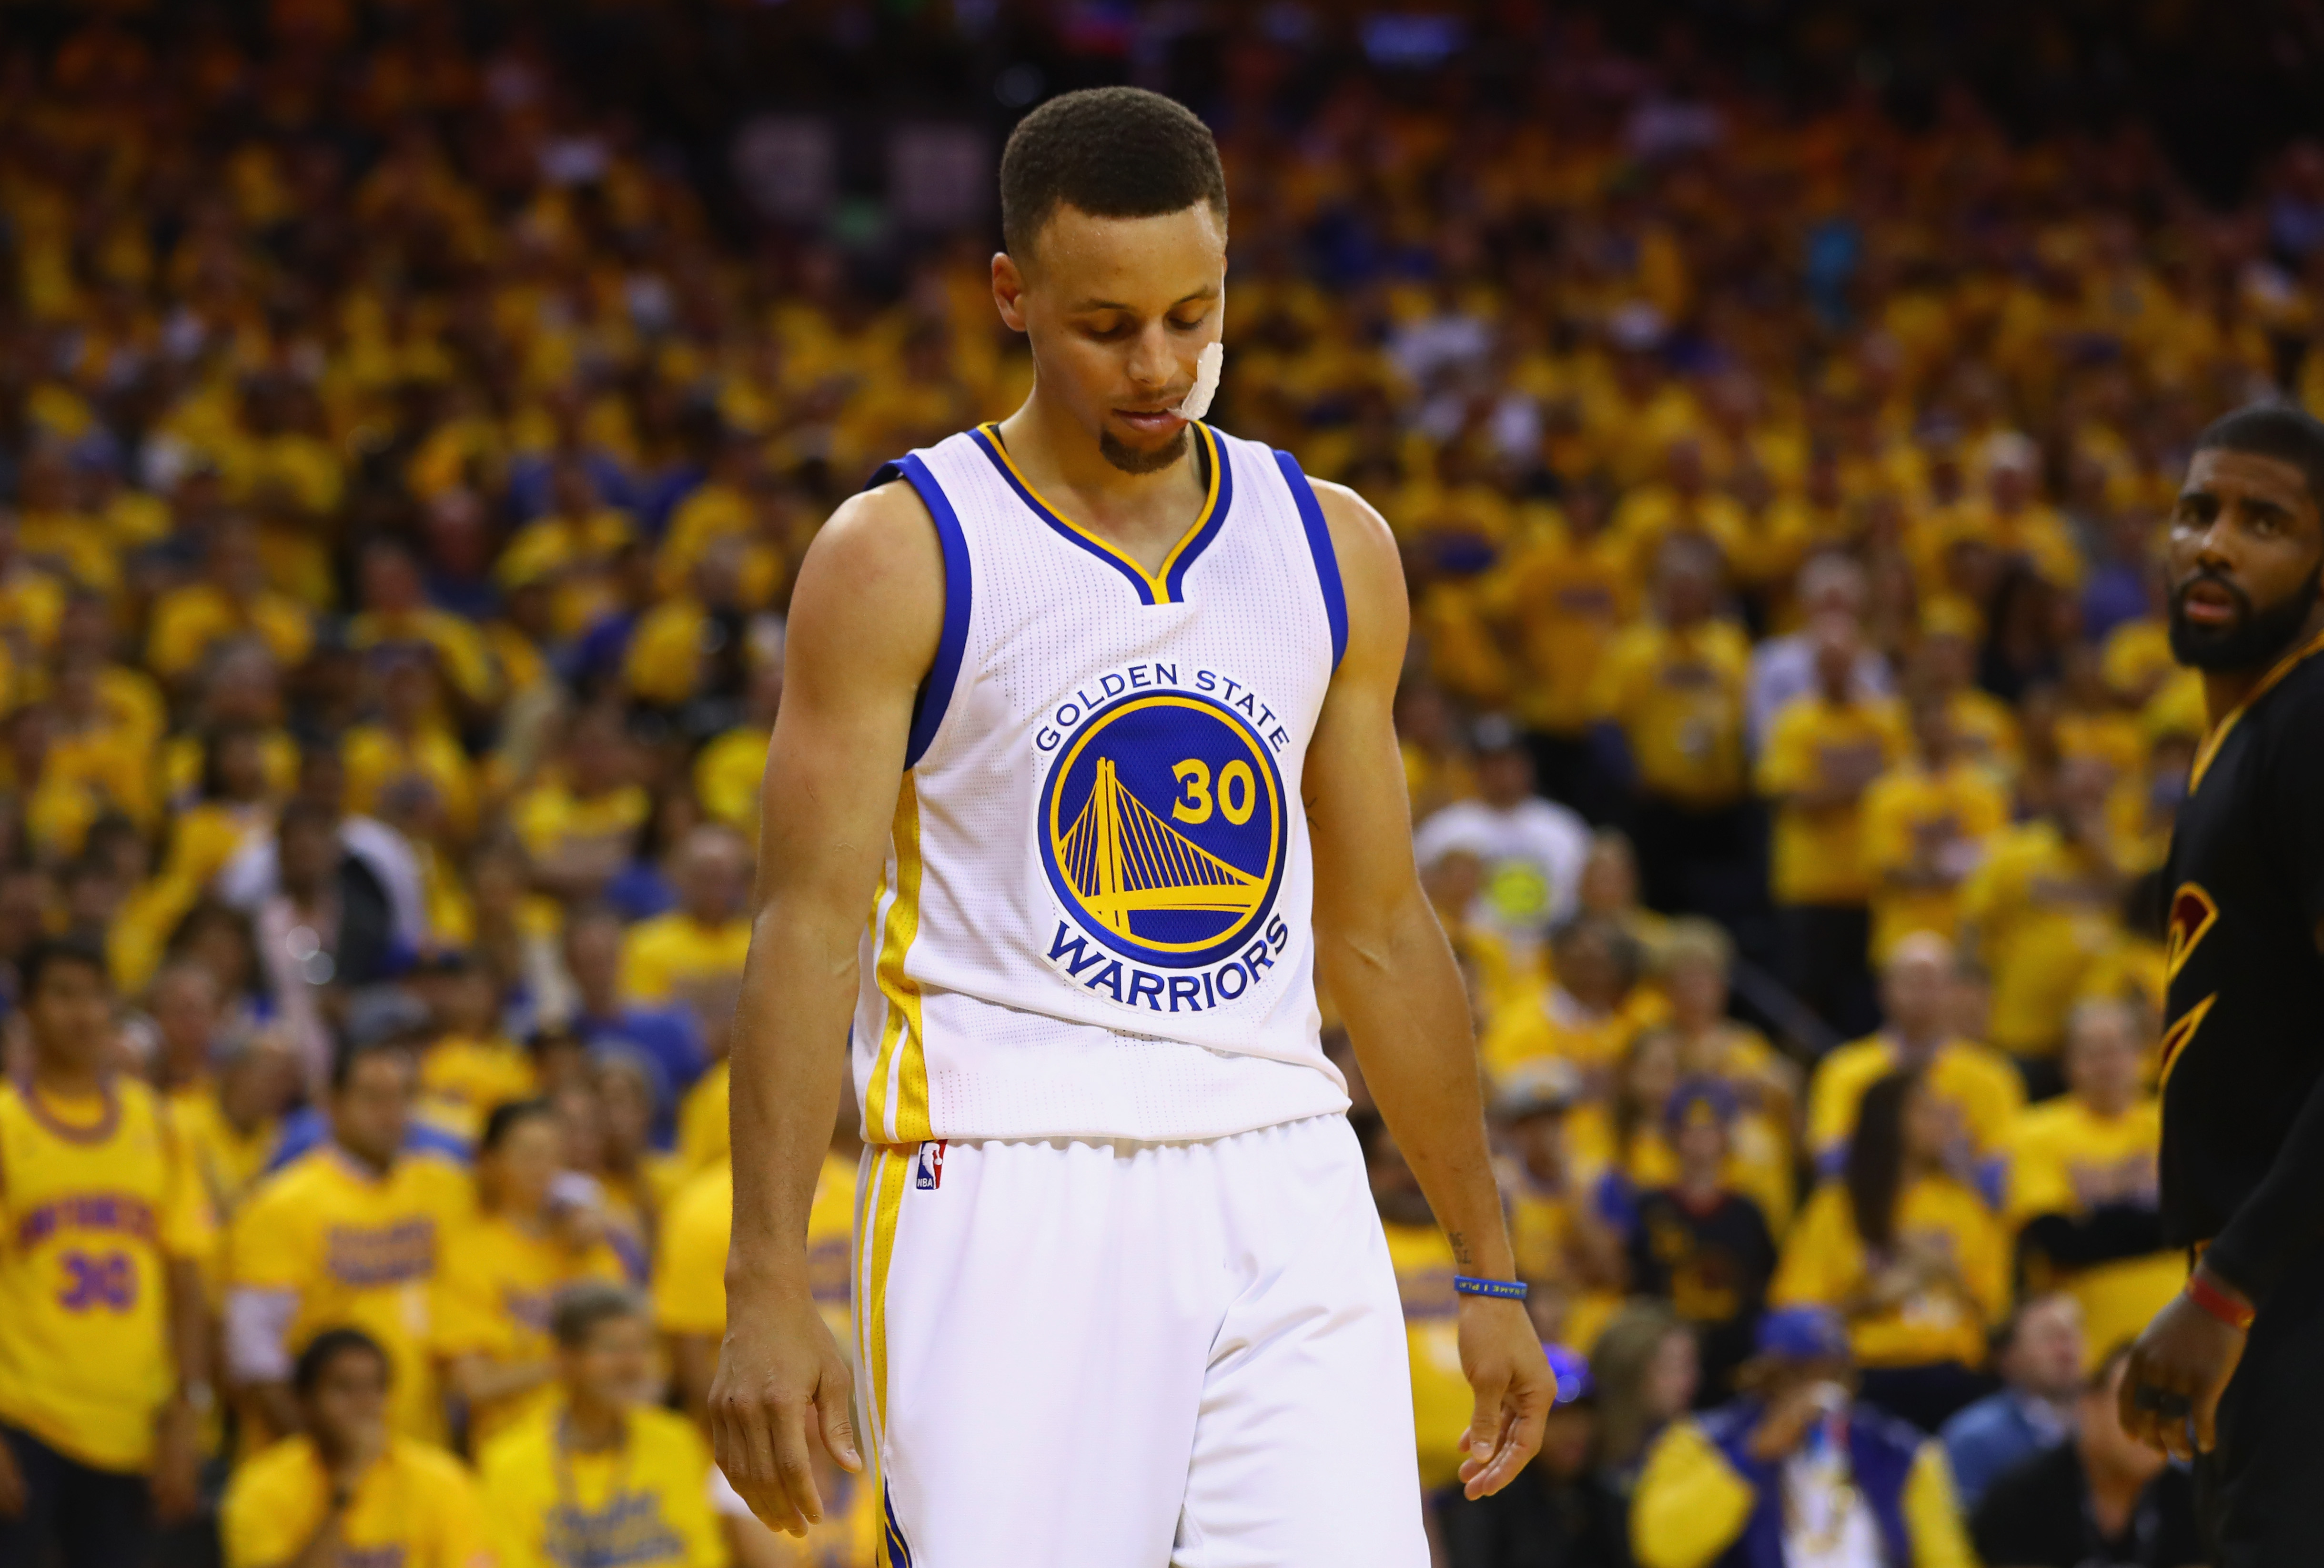 OAKLAND, CA - JUNE 13: Stephen Curry #30 of the Golden State Warriors reacts during the second half against the Cleveland Cavaliers in Game 5 of the 2016 NBA Finals at ORACLE Arena on June 13, 2016 in Oakland, California. NOTE TO USER: User expressly acknowledges and agrees that, by downloading and or using this photograph, User is consenting to the terms and conditions of the Getty Images License Agreement.   Ezra Shaw/Getty Images/AFP